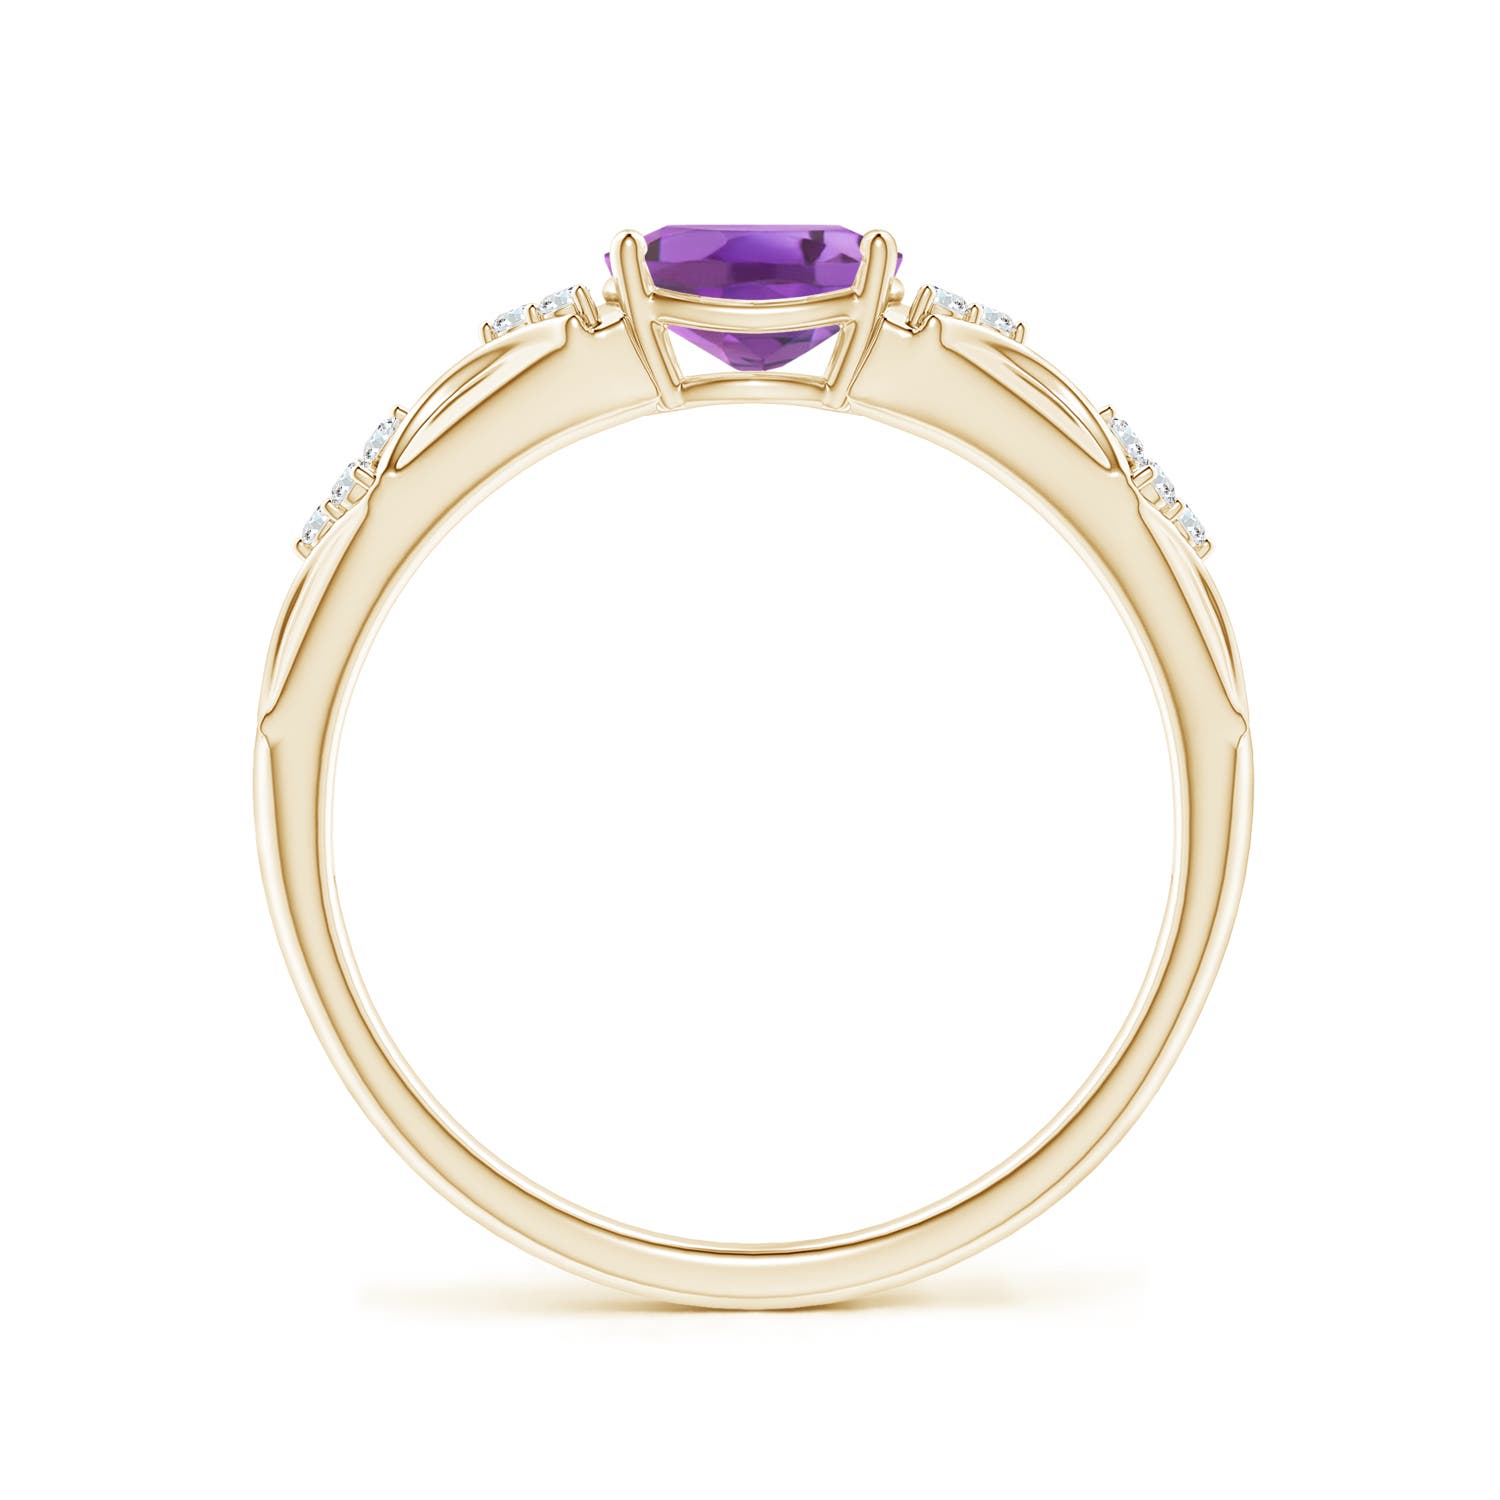 A - Amethyst / 0.75 CT / 14 KT Yellow Gold